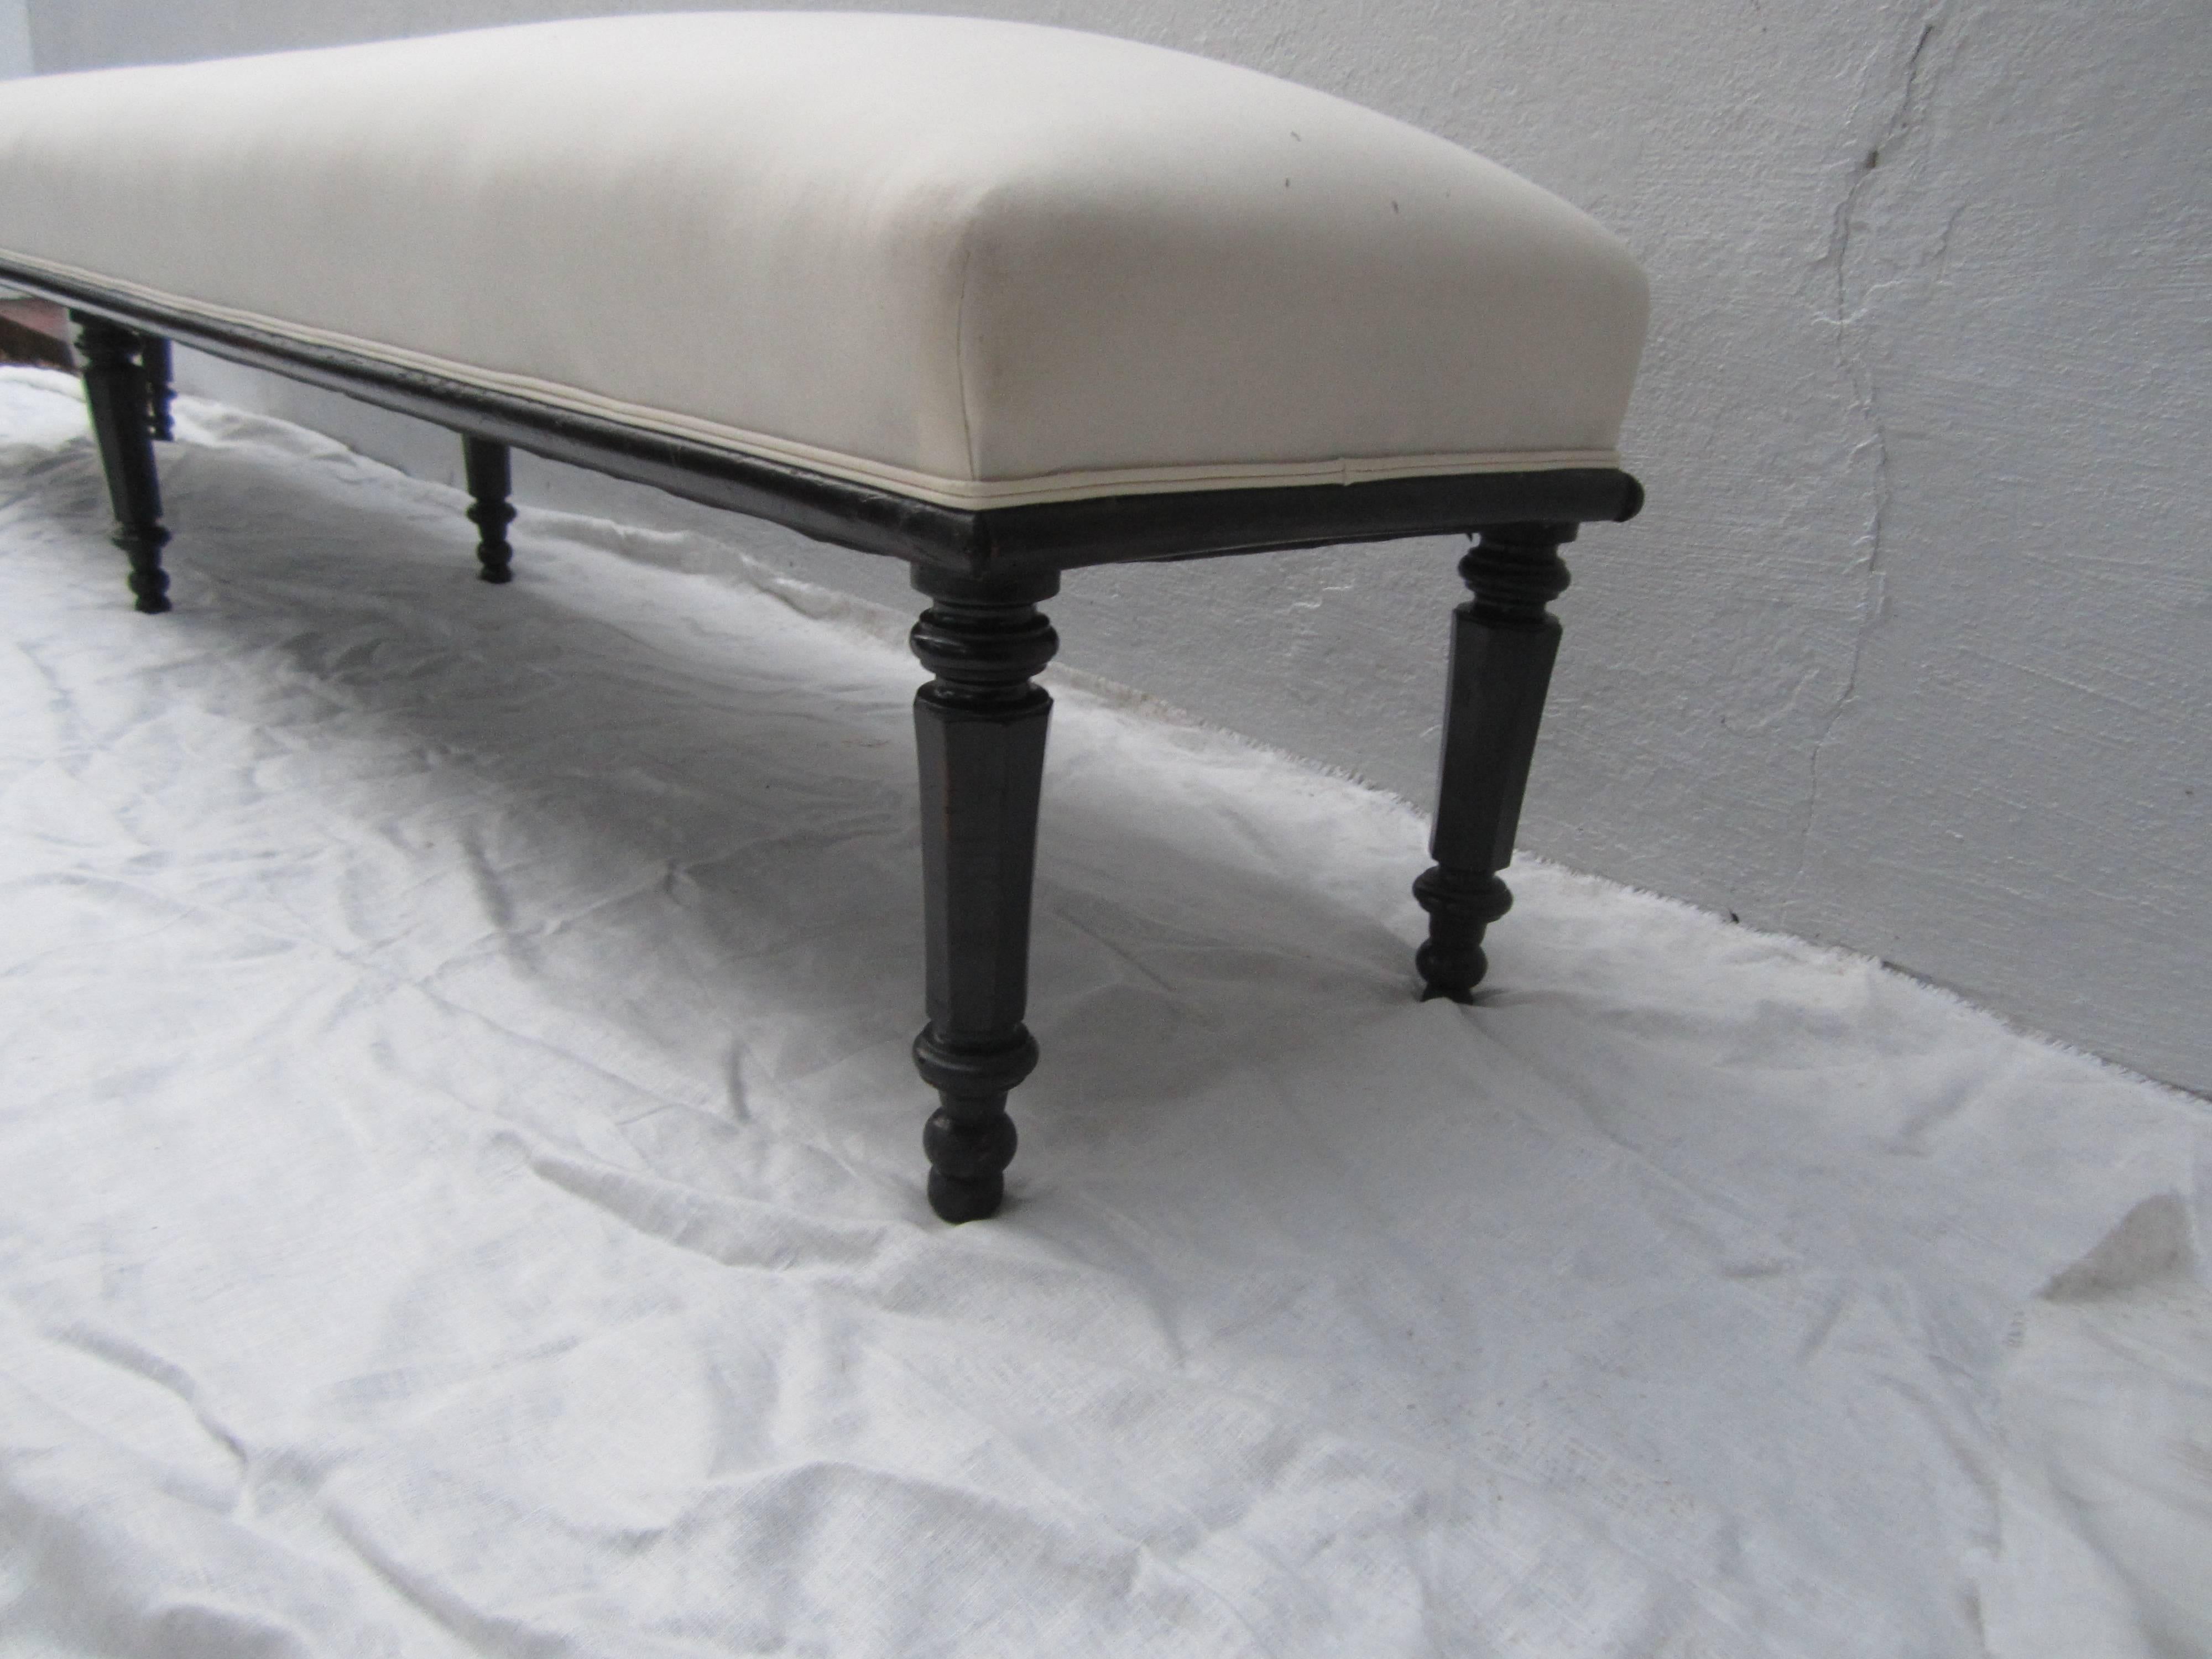 Superb bench measures 10 feet long newly re-sprung and upholstered in muslin a show stopper!